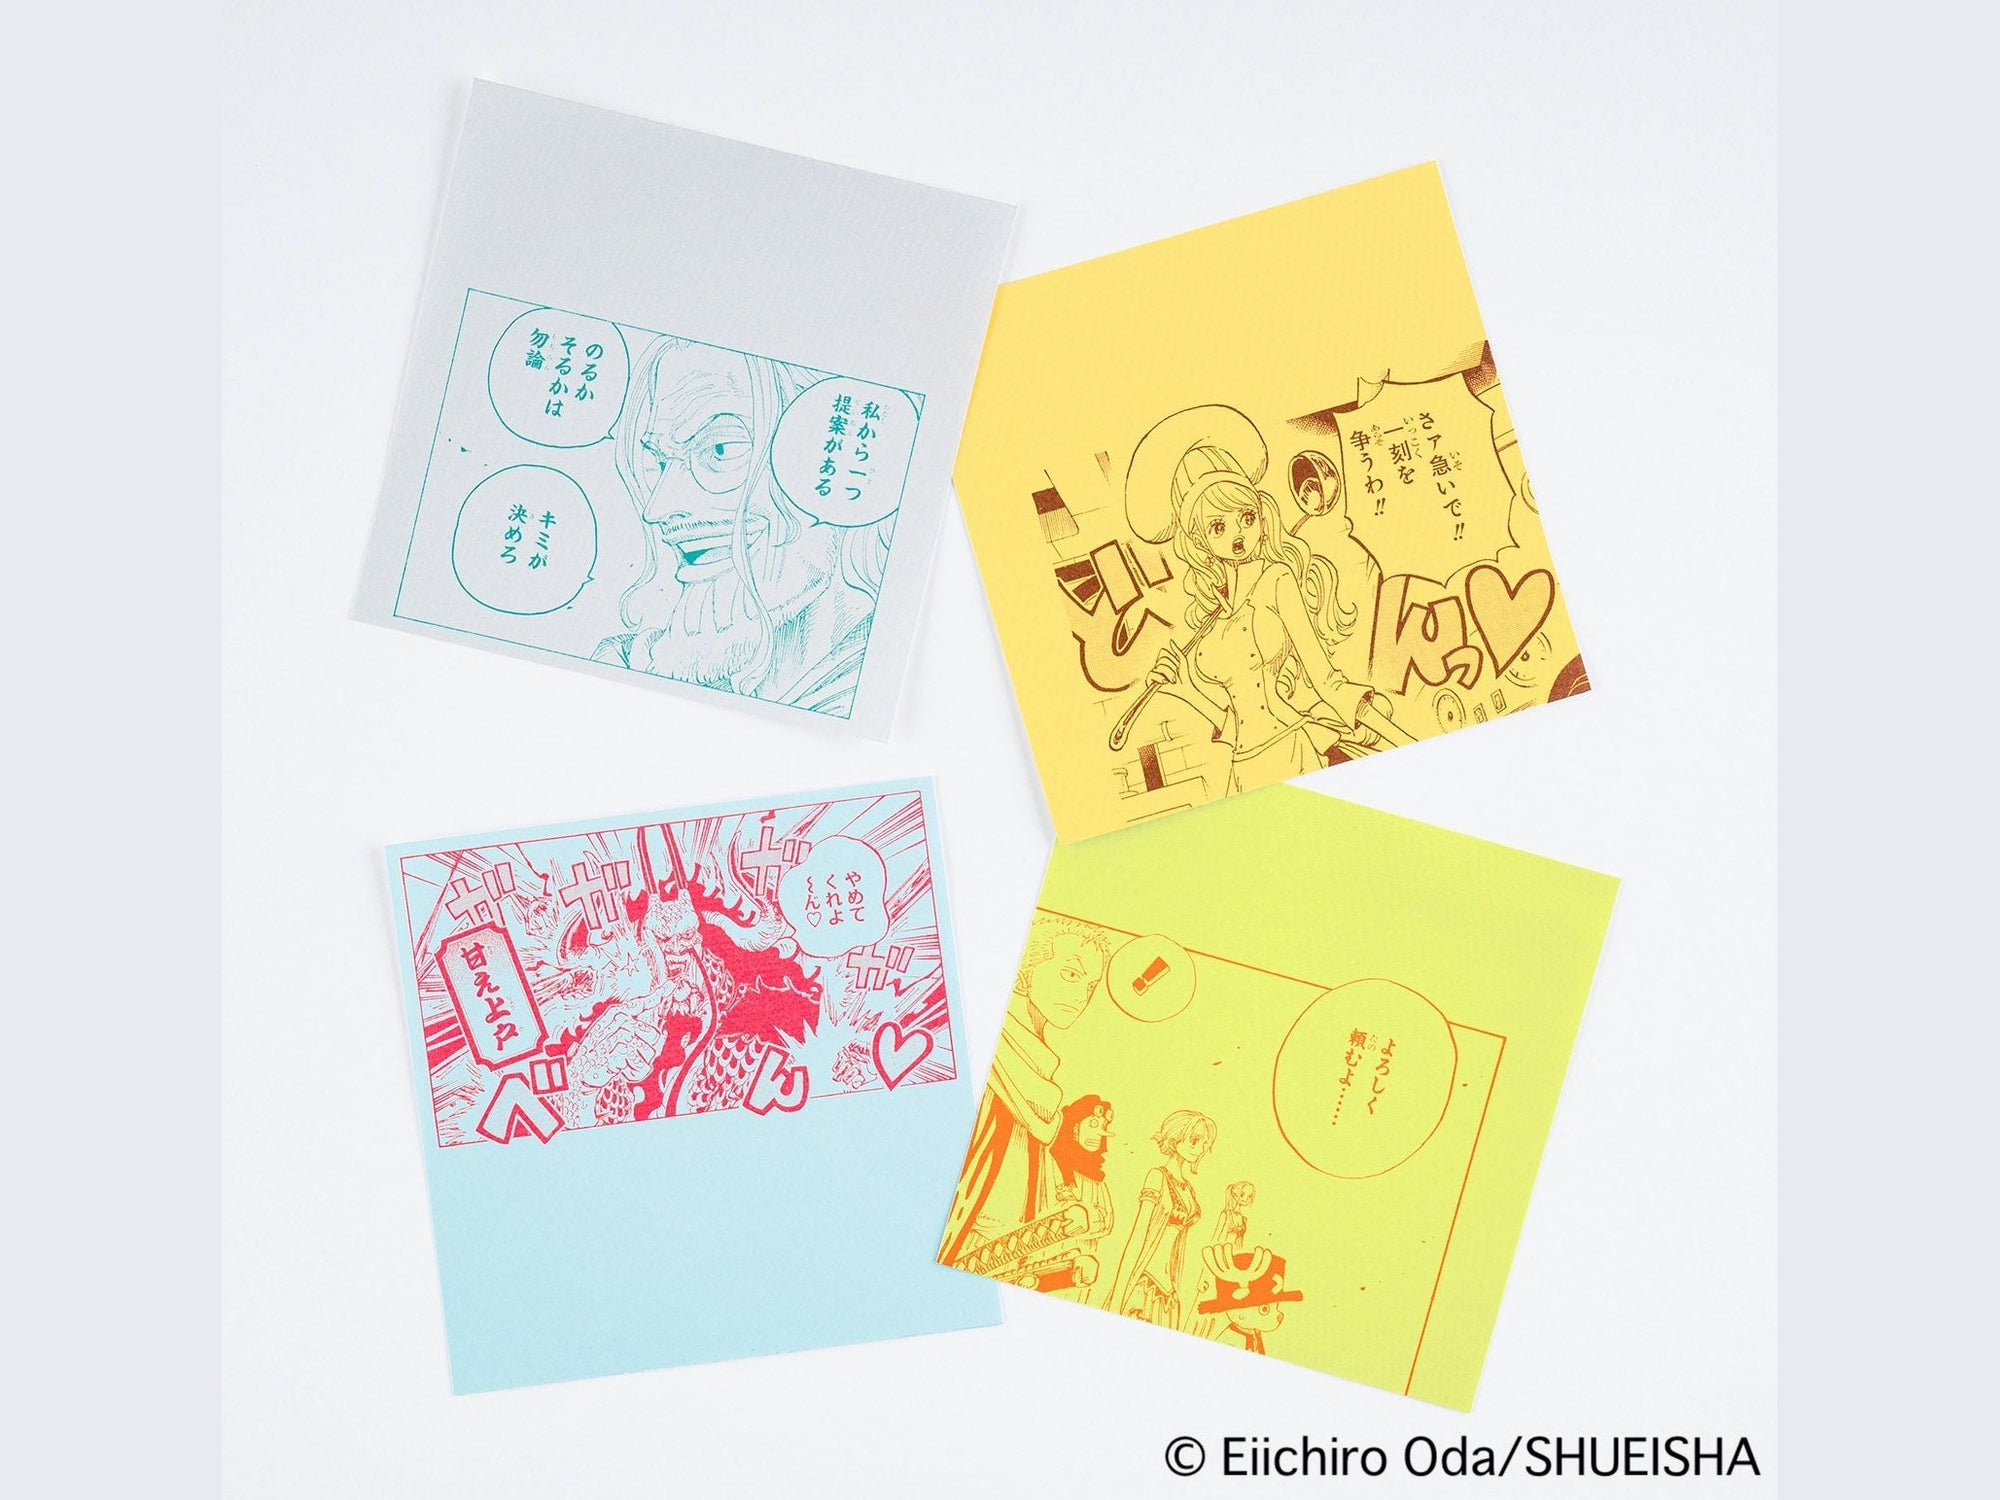 Hobonichi Techo ONE PIECE magazine: Square Letter Paper to Share Your Feelings Vol. 2